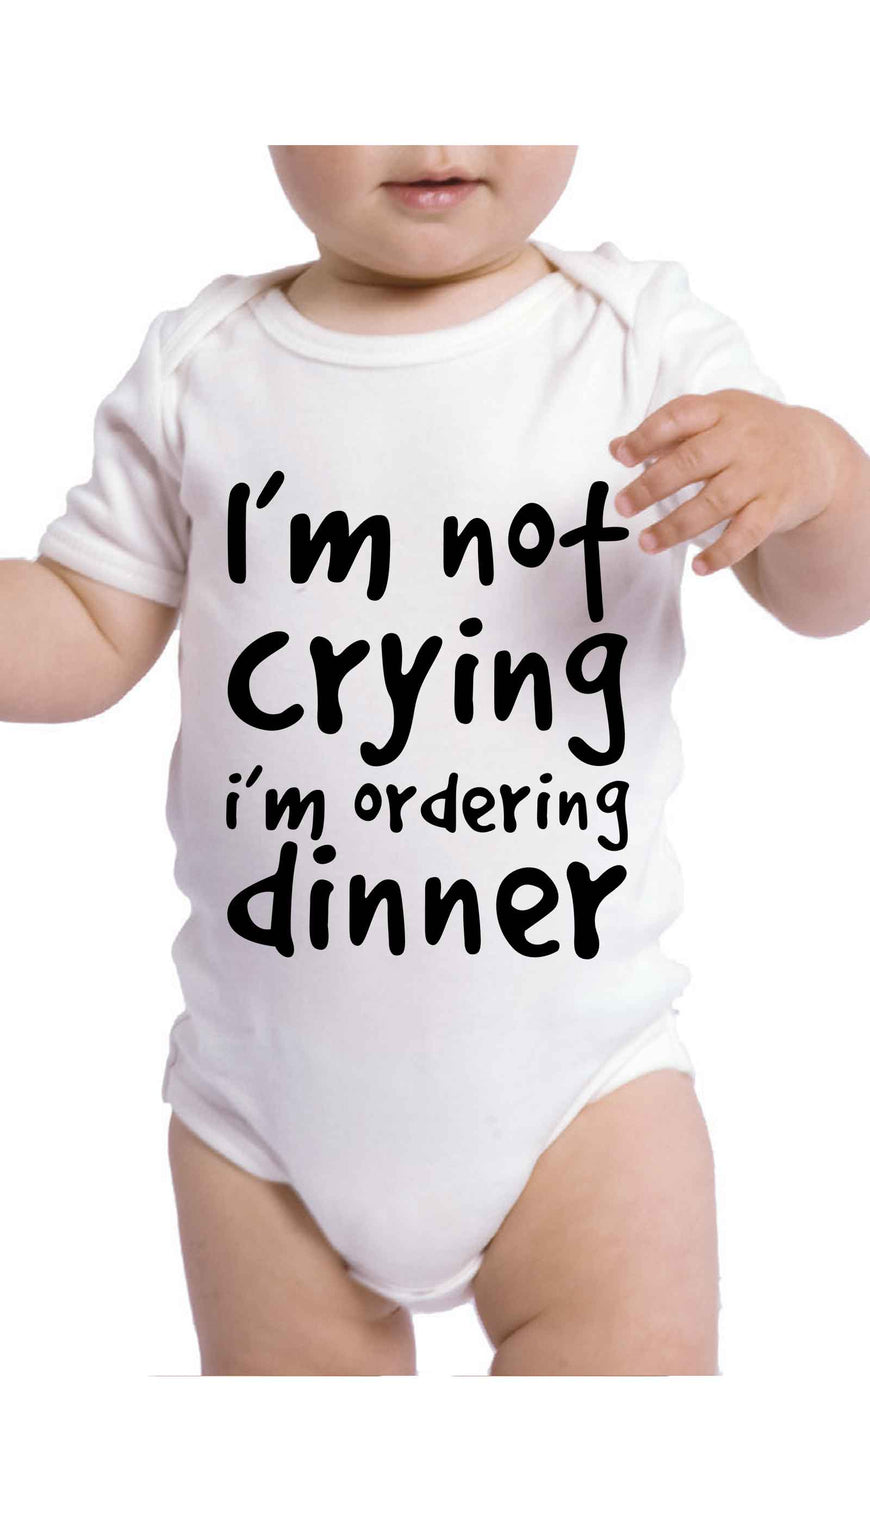 I'm Not Crying I'm Ordering Dinner Funny & Clever Baby Infant Onesie Gift | Sarcastic ME